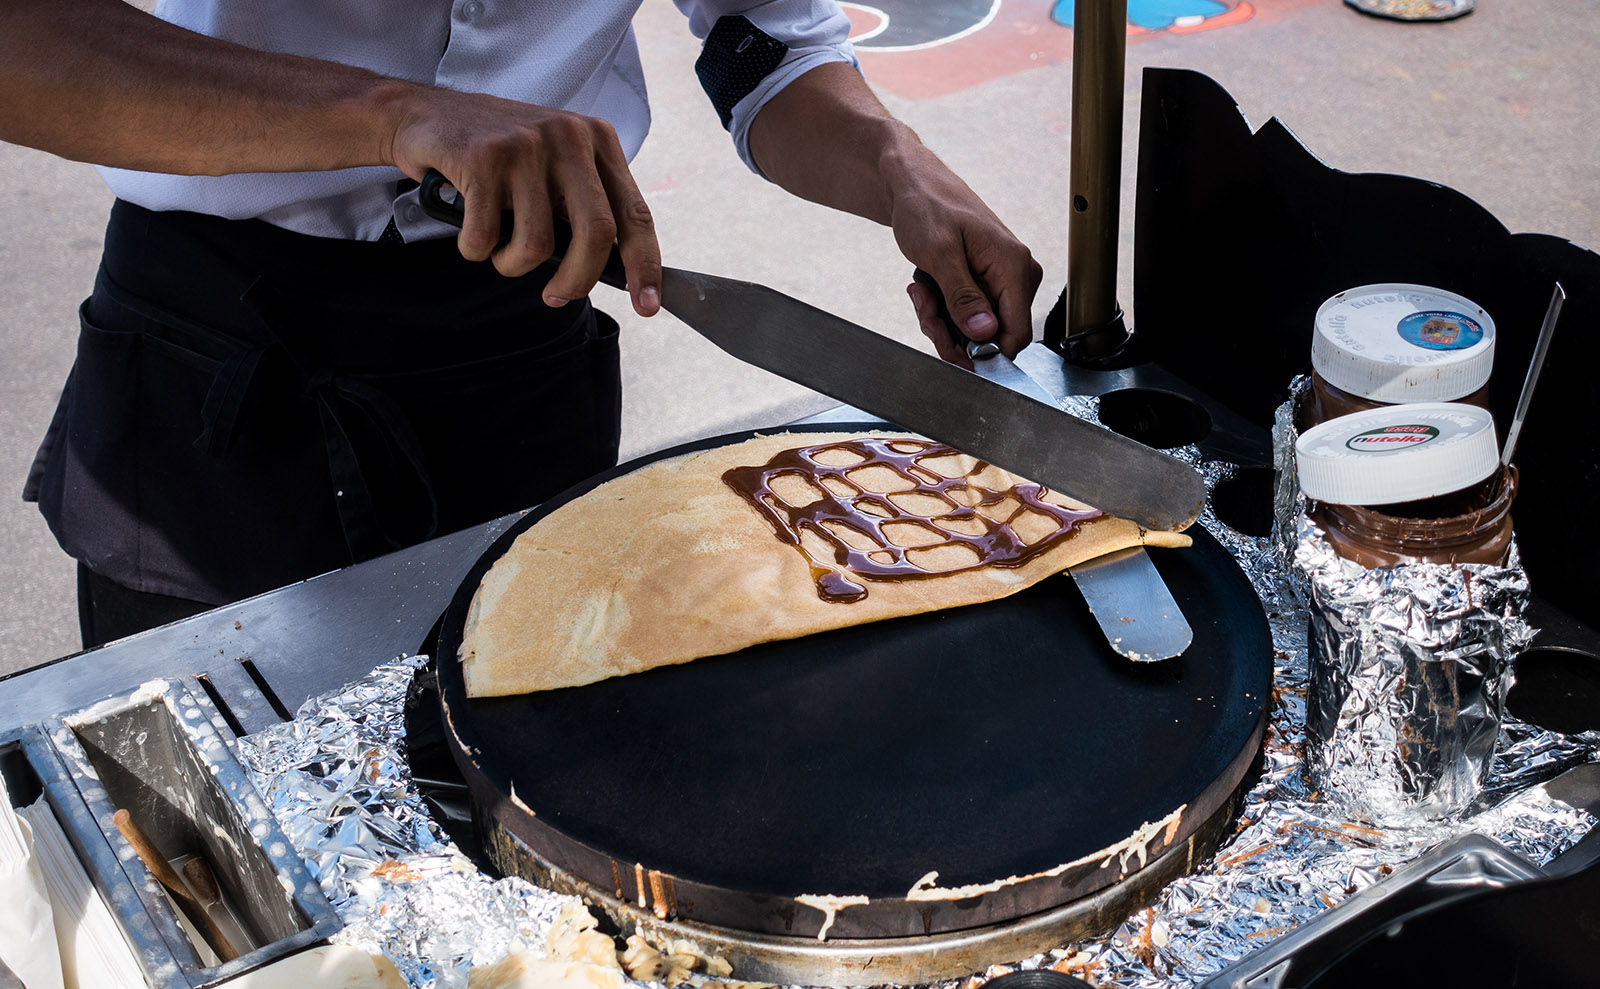 crepe being made on a street cart